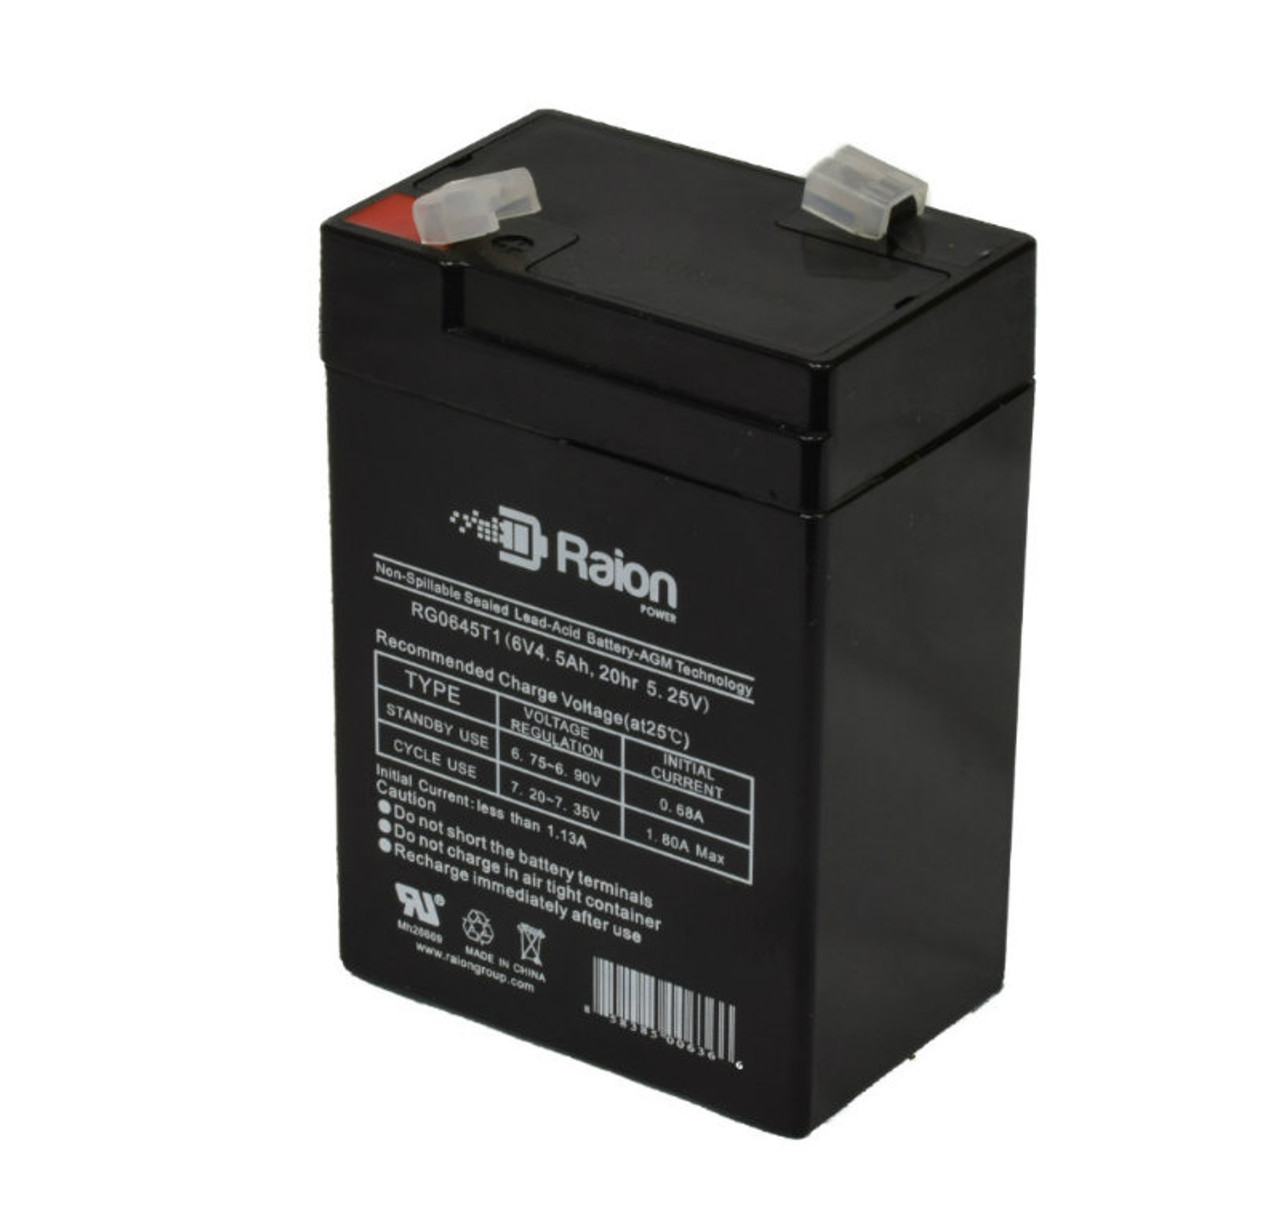 Raion Power RG0645T1 6V 4.5Ah Replacement Battery Cartridge for Sealed Lead Acid 6 Volt 4.5 Amp WL